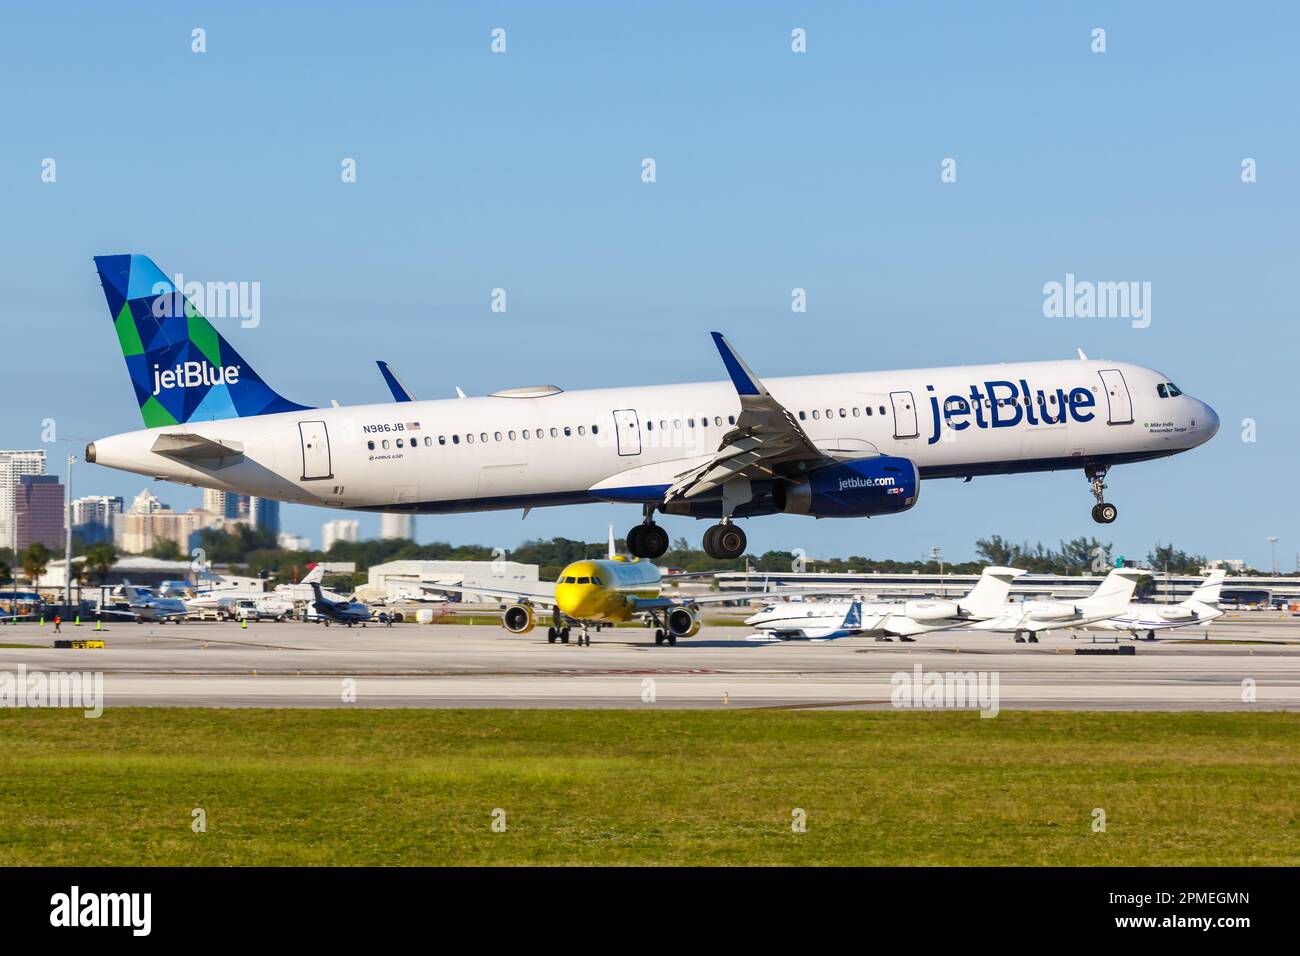 Fort Lauderdale, United States – November 14, 2022: jetBlue Airbus A321 airplane at Fort Lauderdale airport (FLL) in the United States. Stock Photo